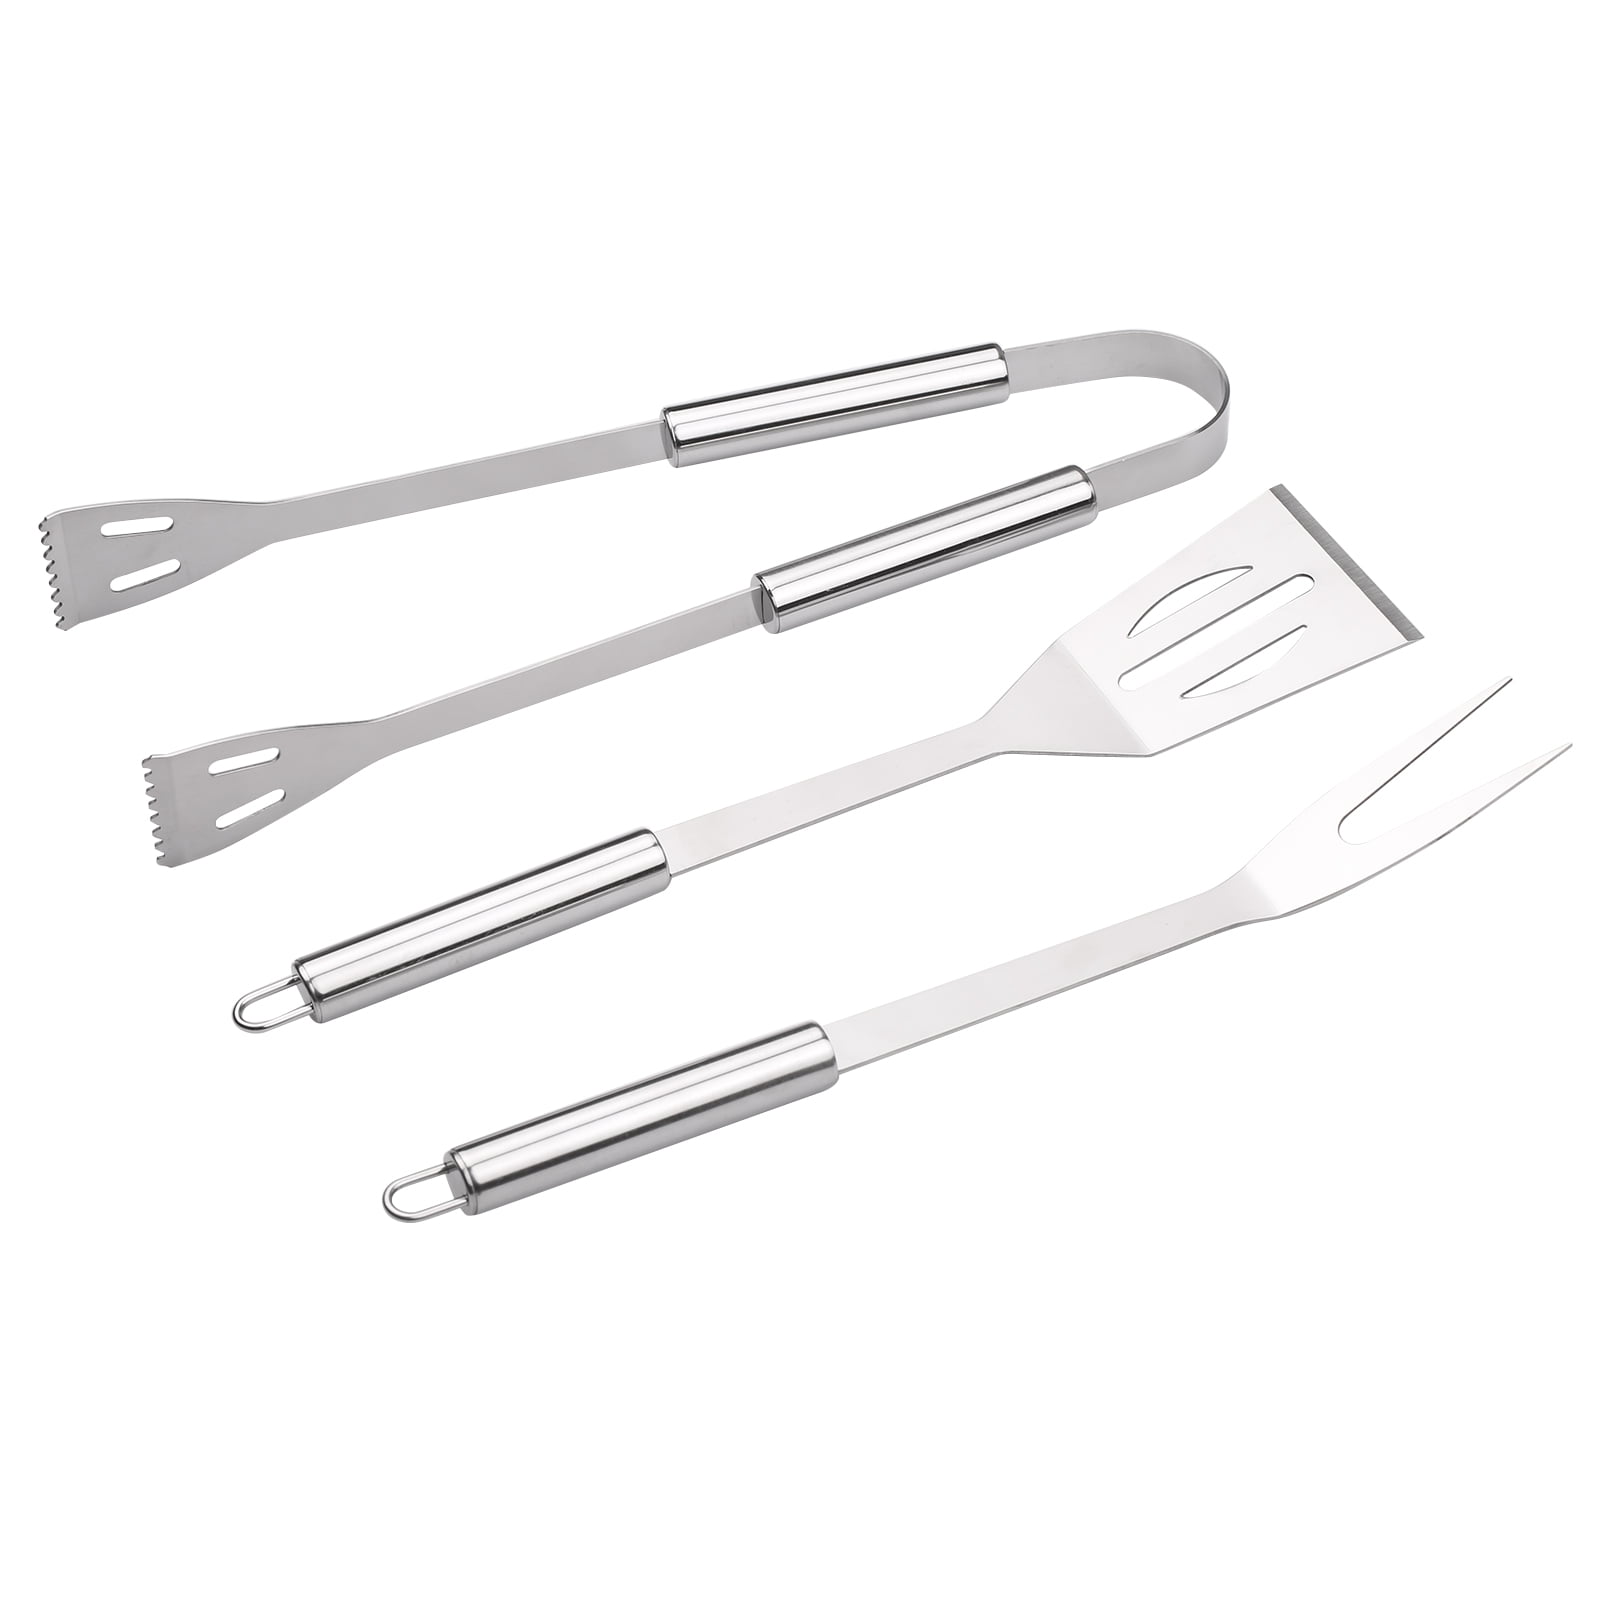 3pcs BBQ Tool Set Stainless Steel Barbecue Grilling Utensil Kit with Bag SUMMER 